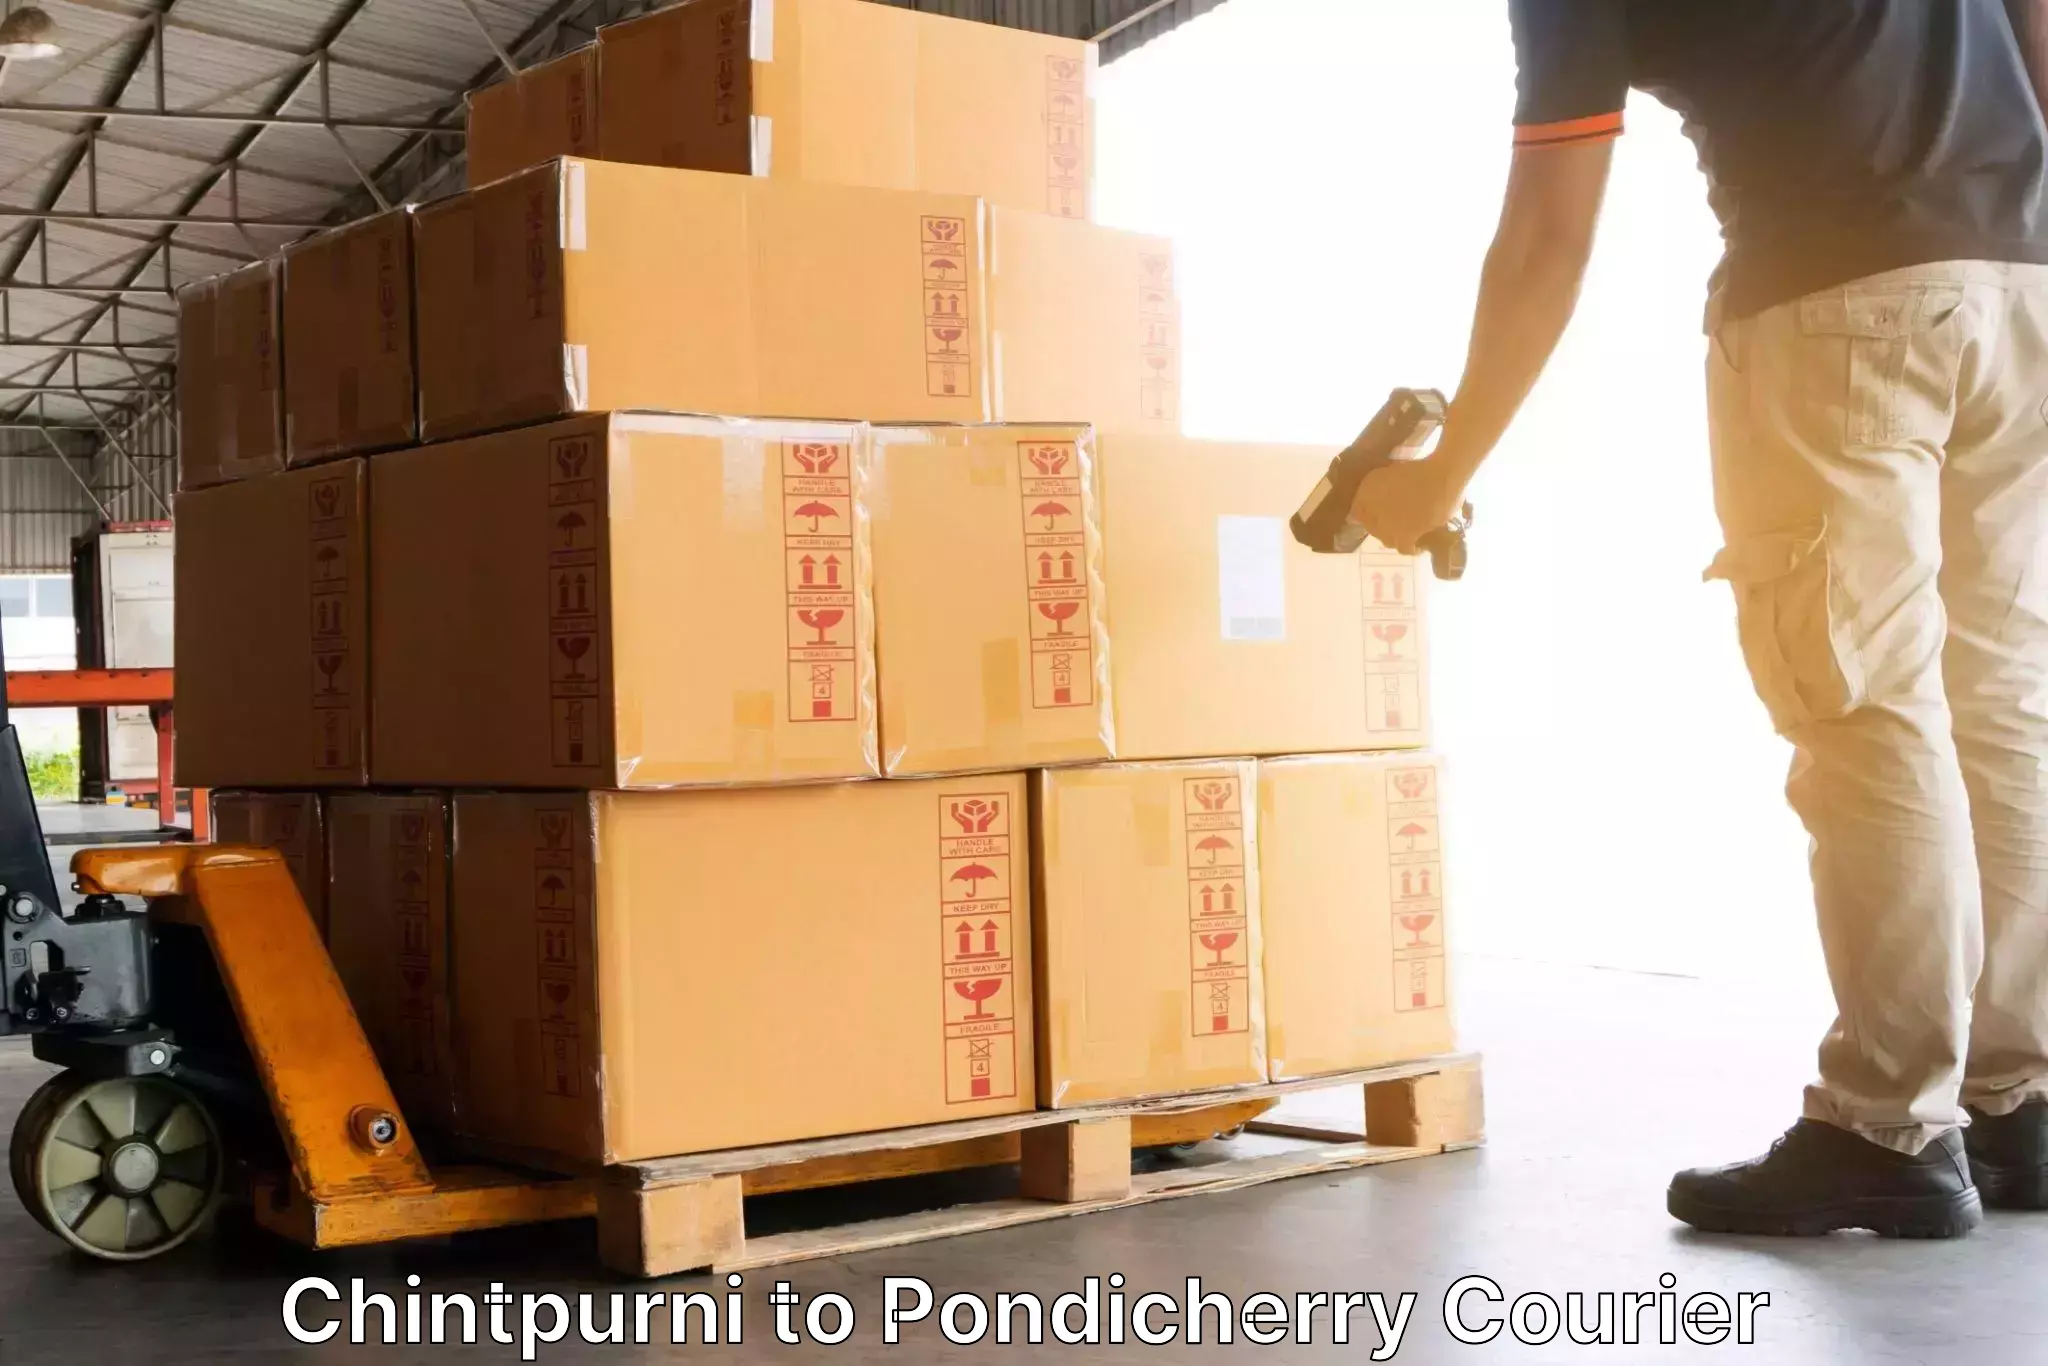 Streamlined delivery processes Chintpurni to Pondicherry